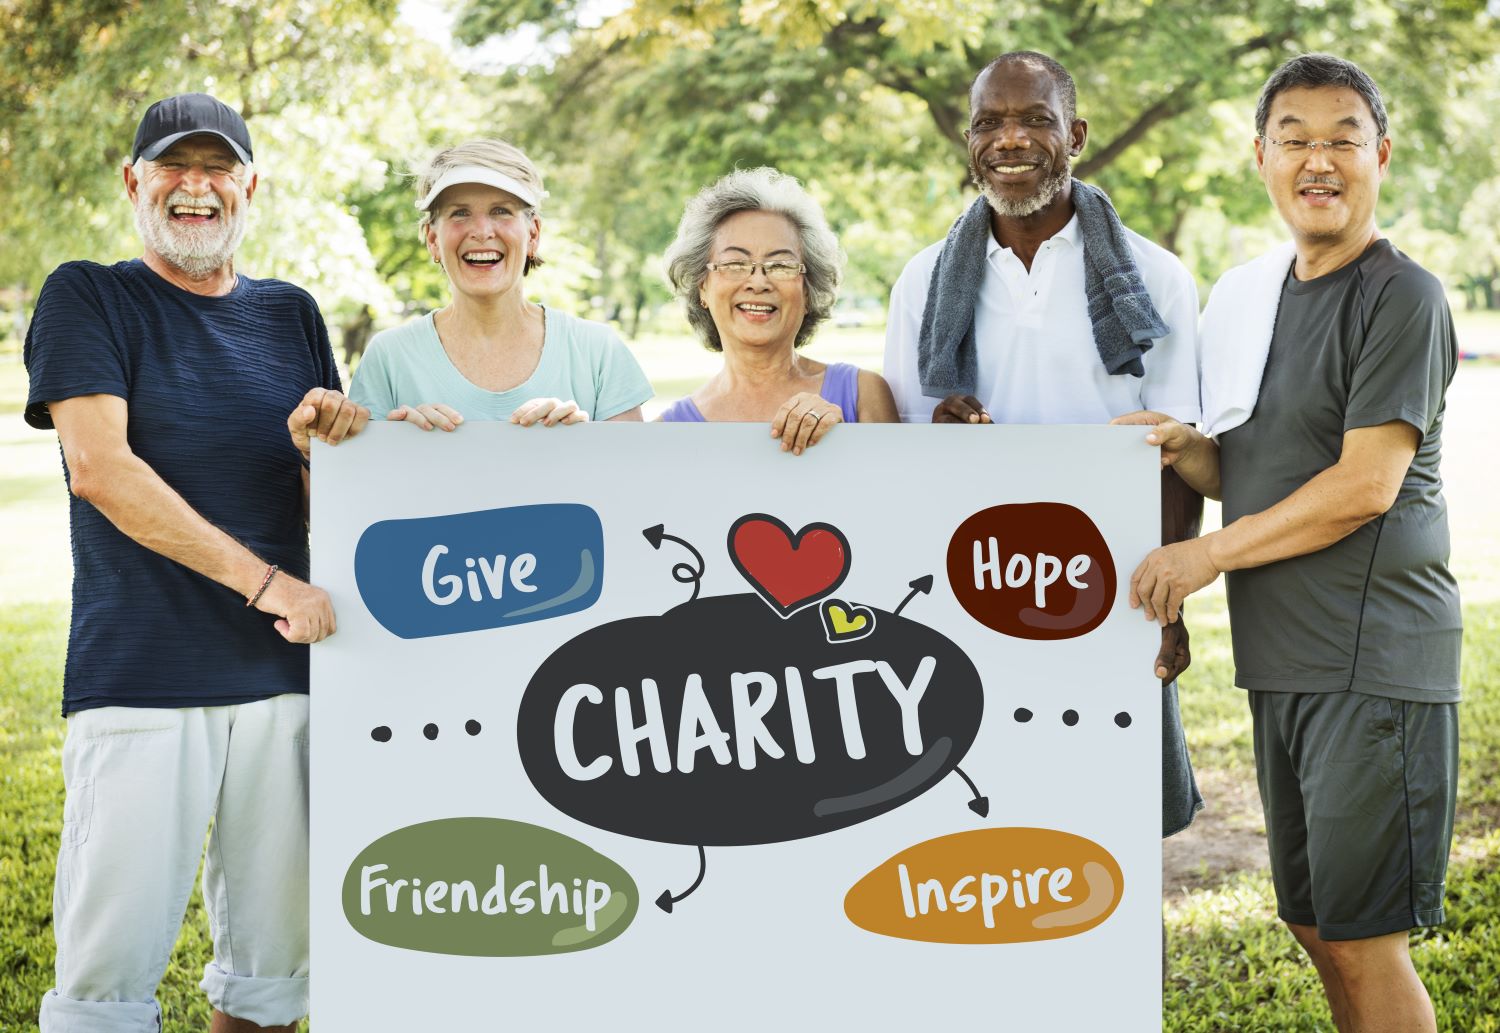 Qualified Charitable Distributions (QCDs) allow you to receive tax benefits when you donate funds from your retirement account to charitable causes